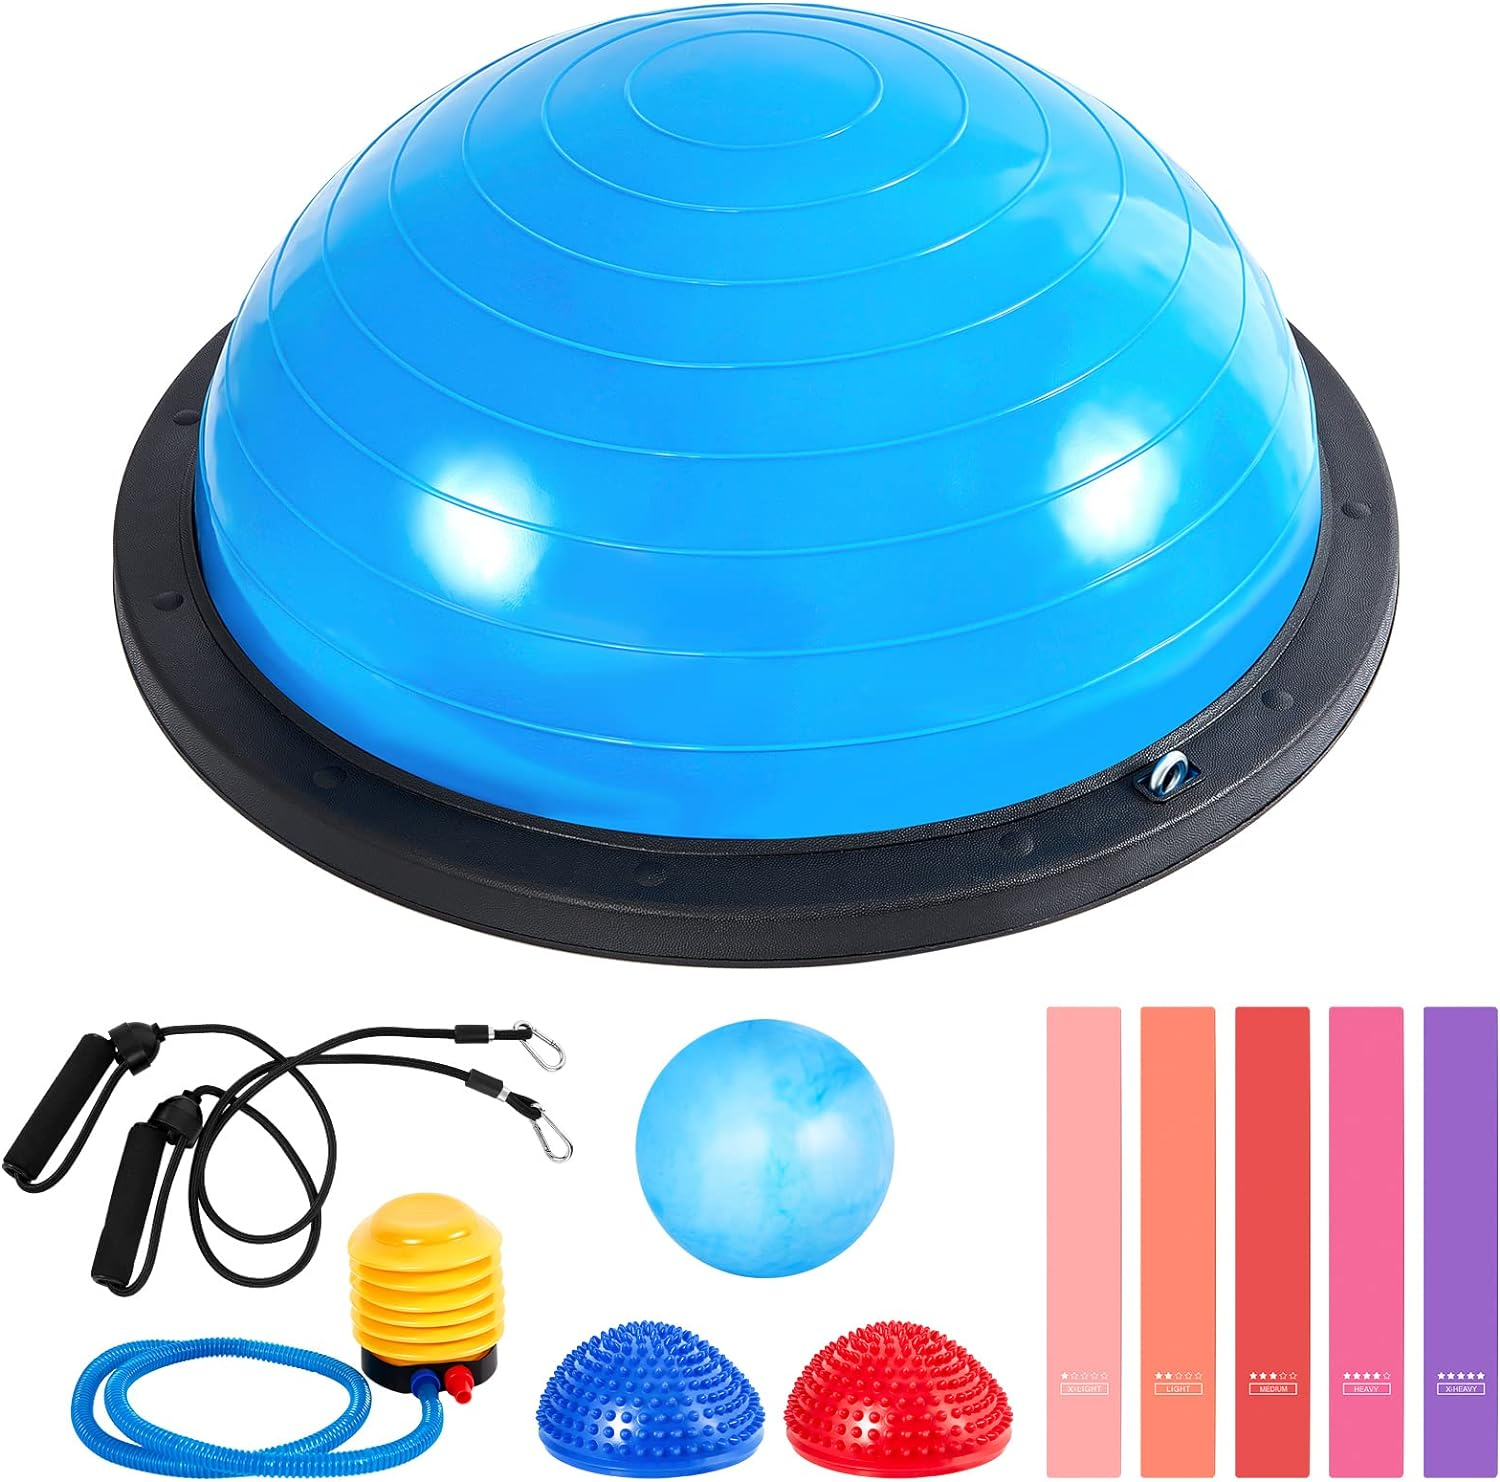 Half Ball Trainer Half Yoga Ball with Resistant Band Foot Pump Set, Half Exercise Ball with Fitness Elastic Belt Hedgehog Balance Pods for Core Stability Full Body Workout Home Gym Office